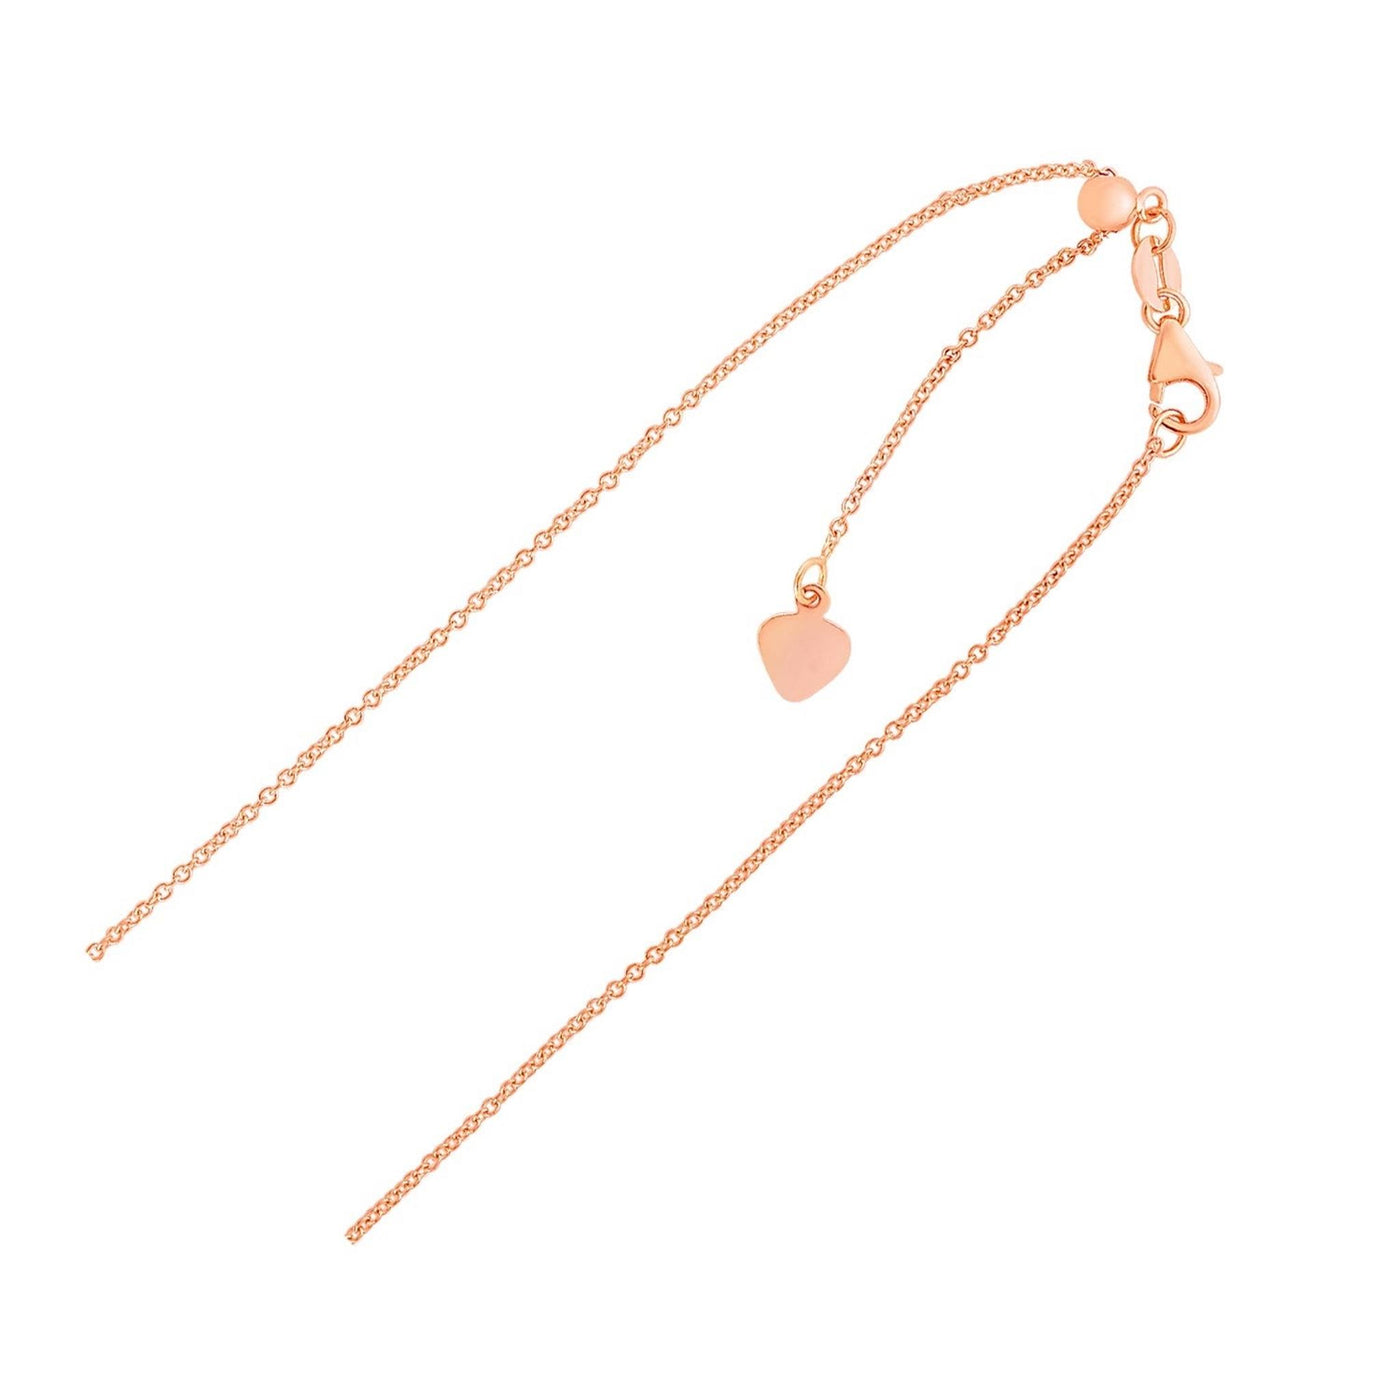 14K Rose Gold 1.05mm 22" Adjustable Cable Link Chain